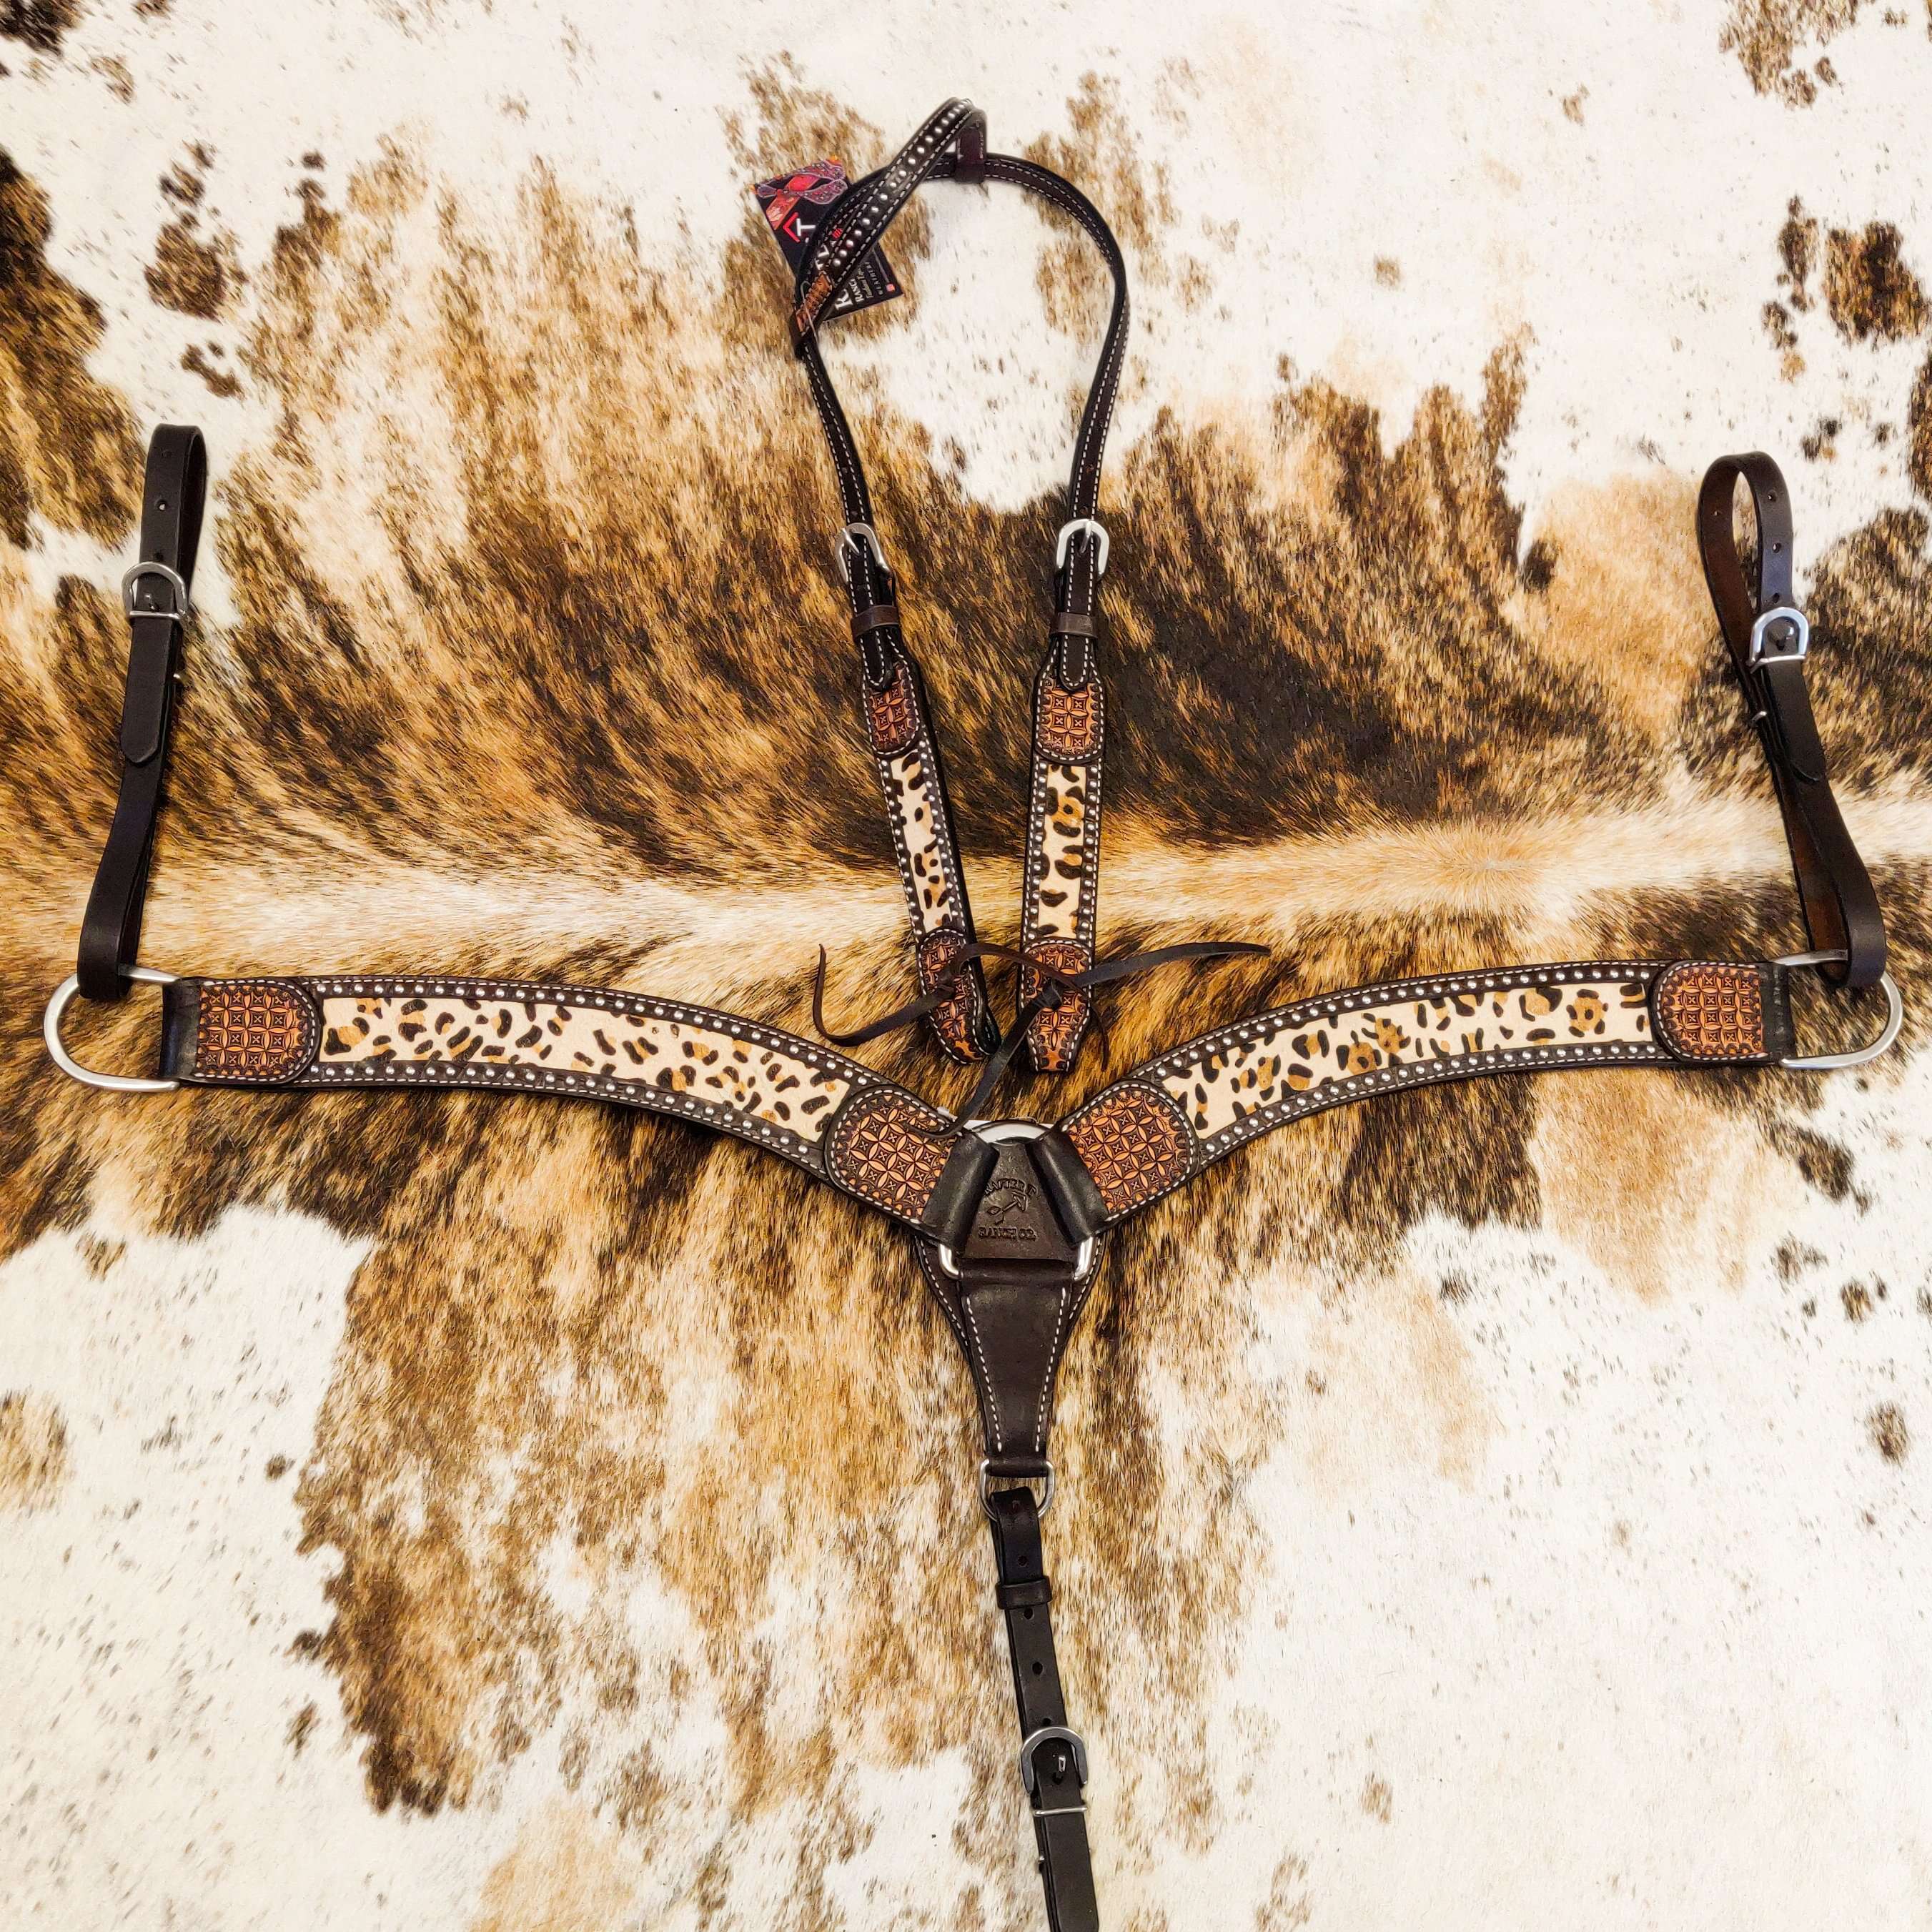 The Cheetah Tack Collection - The Glamorous Cowgirl